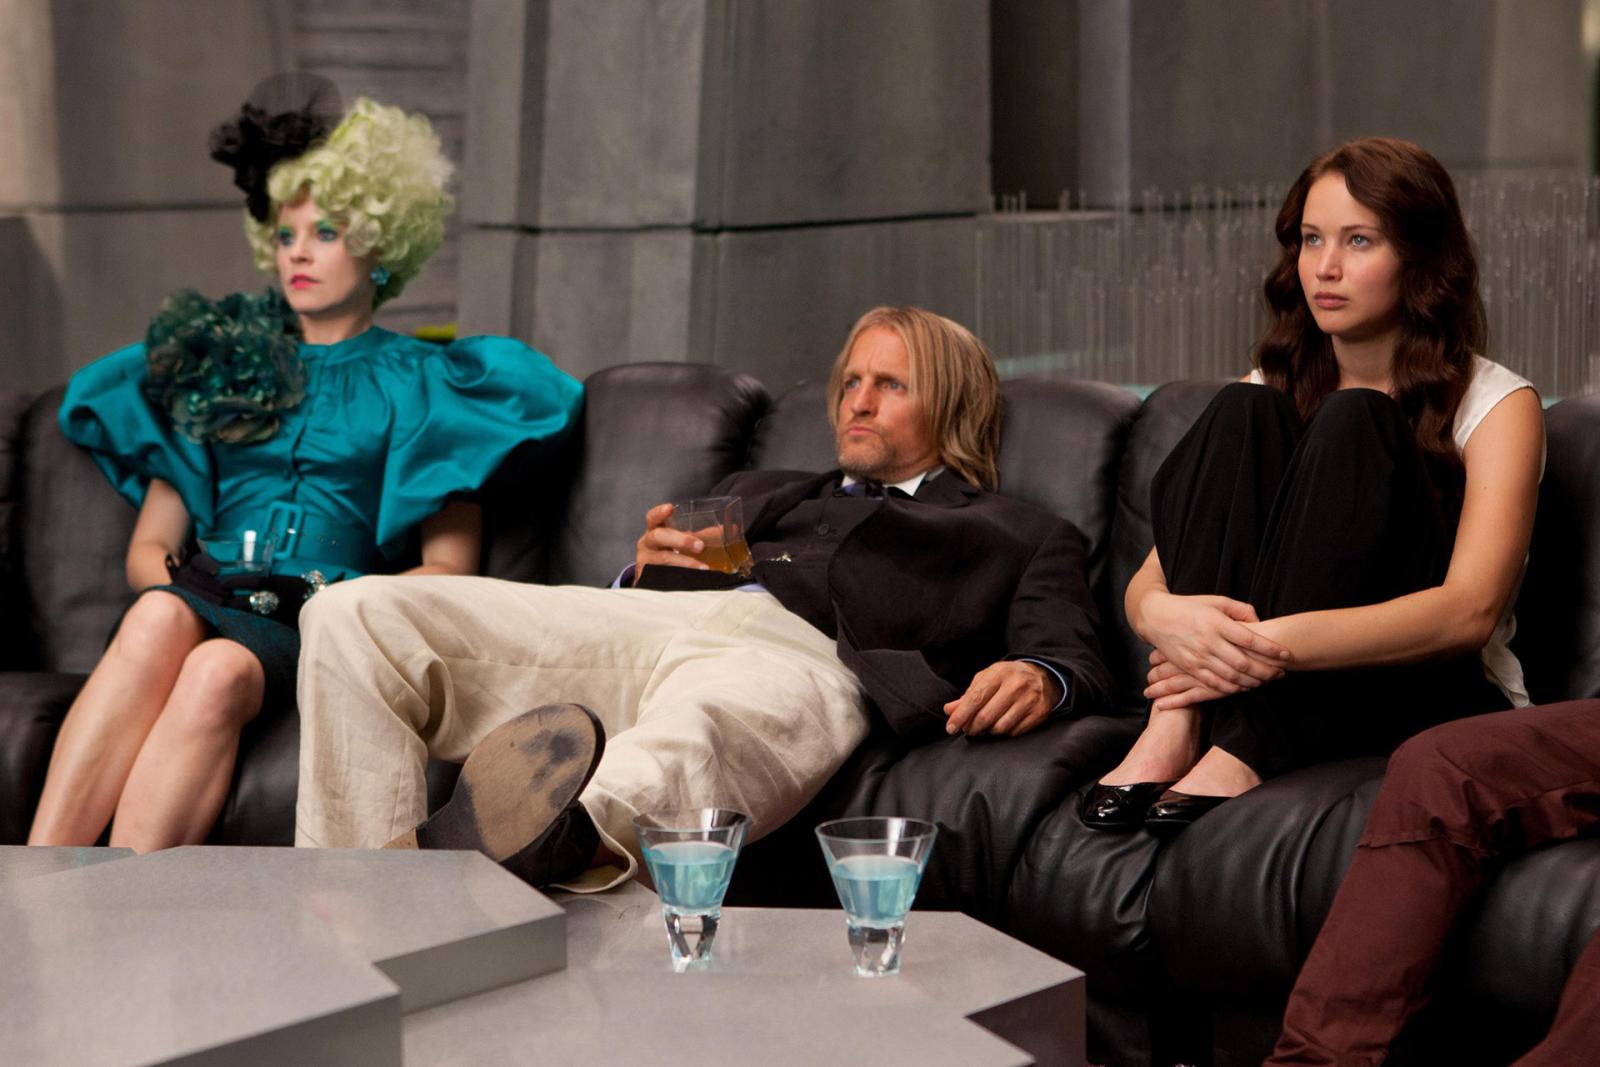 Katniss 'Real' Age in Hunger Games Makes This Scene Way More Creepy - image 1